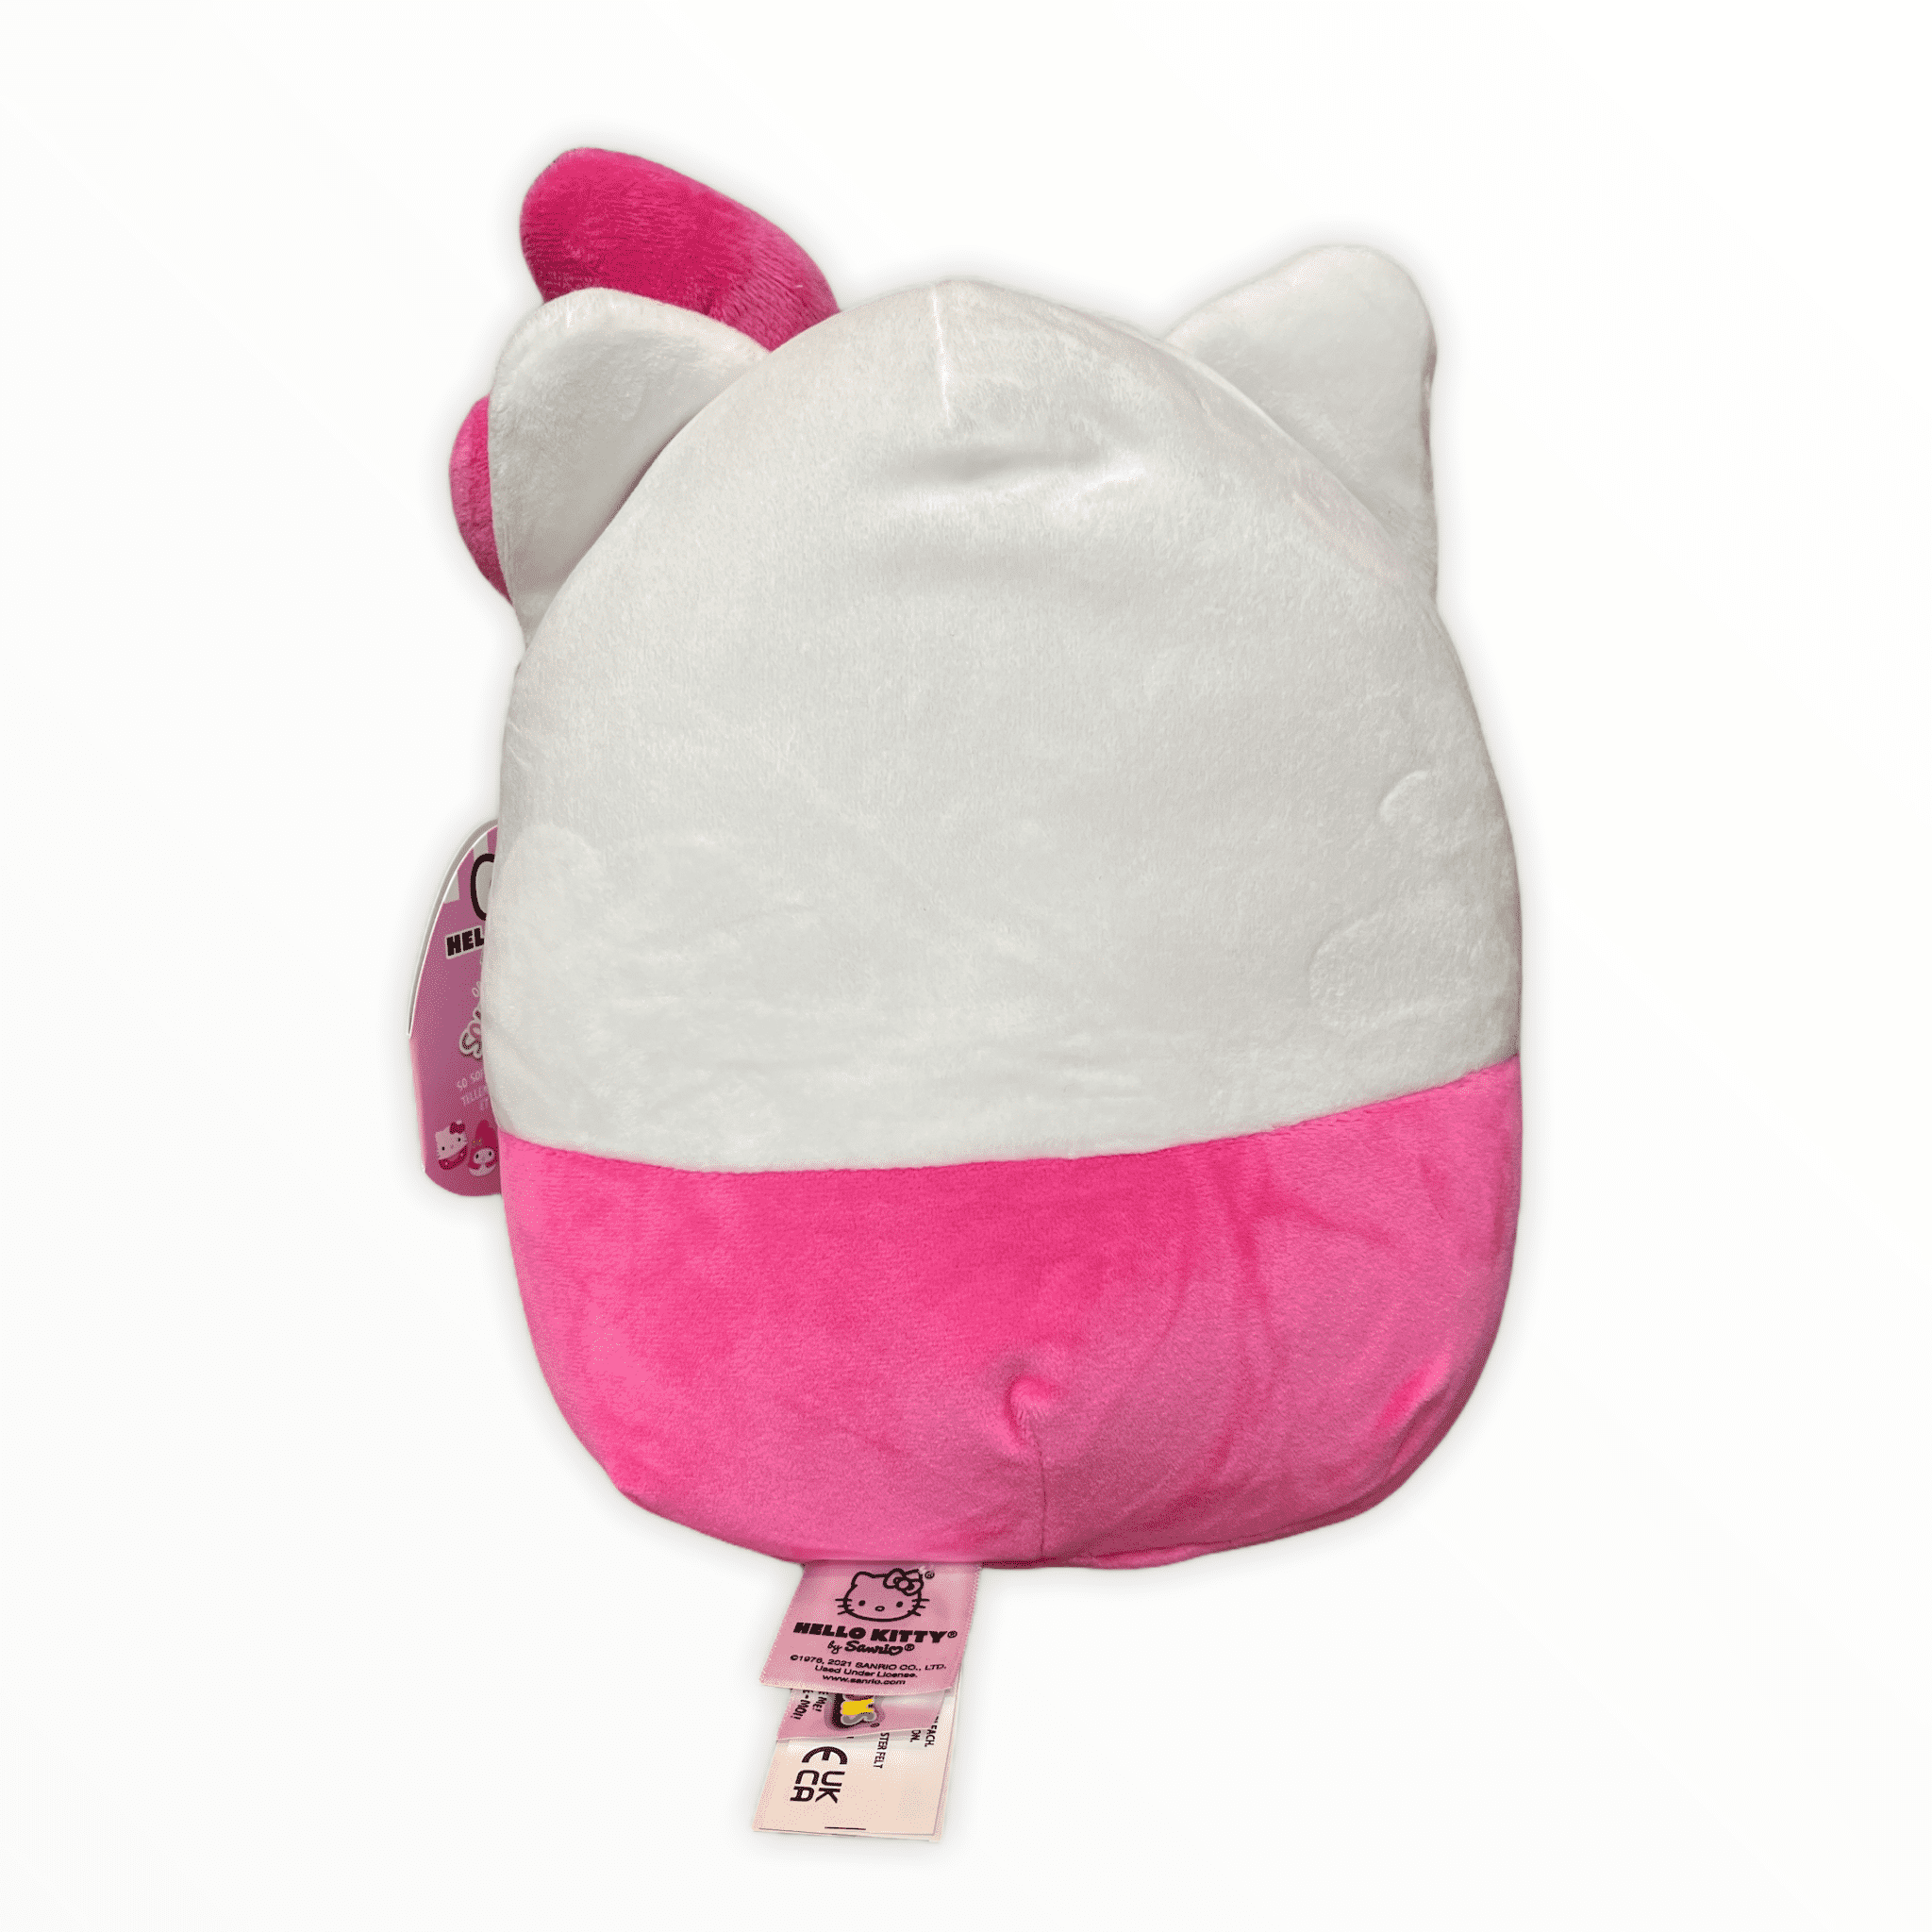  Squishmallows Hello Kitty Pink Bow & Shorts 14-Inch - Sanrio  Ultrasoft Stuffed Animal Large Plush Toy, Official Kellytoy : Toys & Games